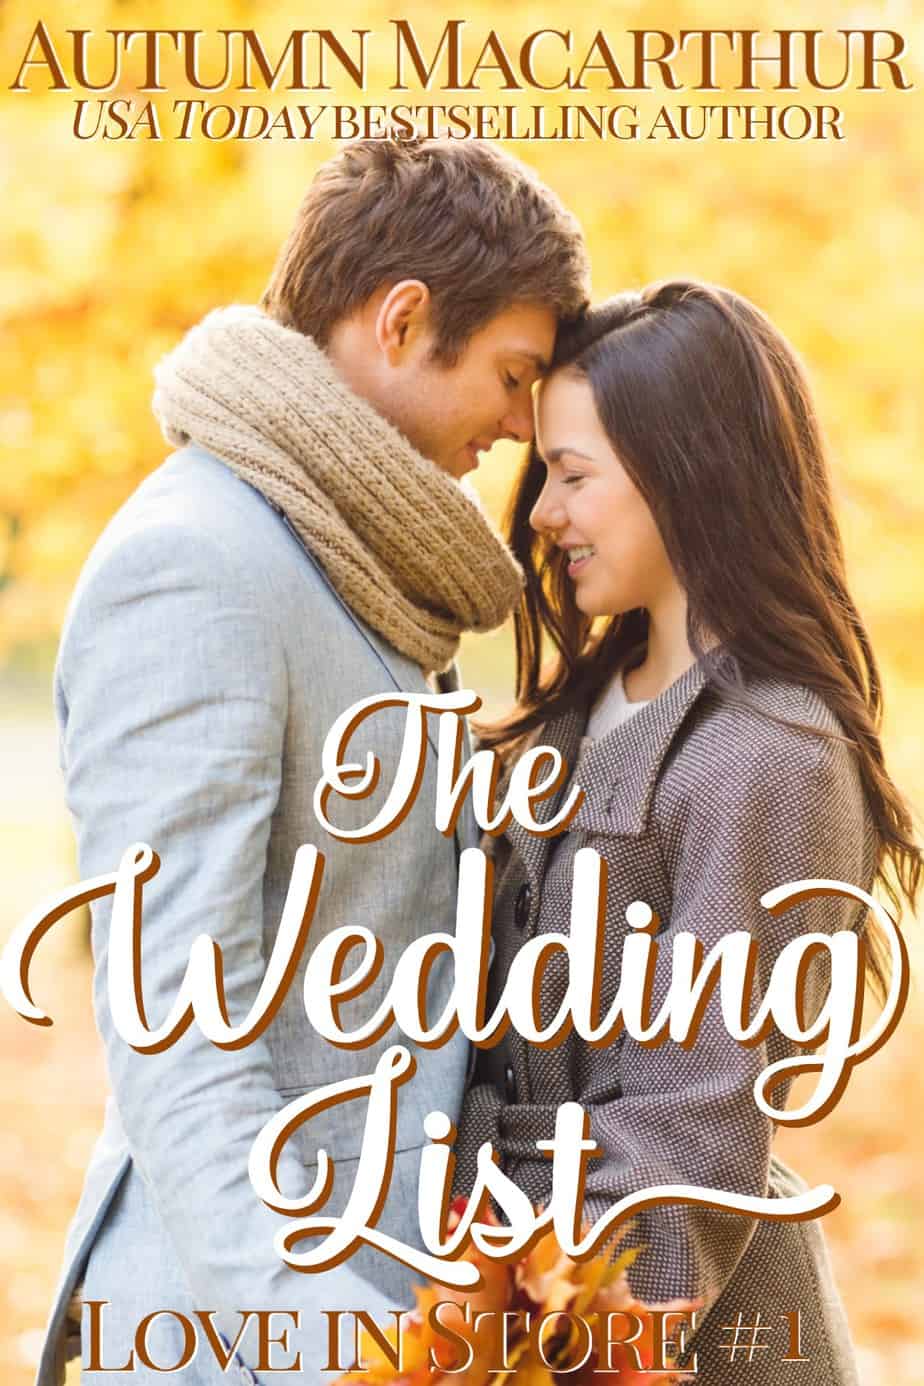 Cover image for The Wedding List by Autumn Macarthur, a sweet, clean, and gently funny romance of teen loves reunited years later. Book 1 in my Love in Store series set in London.